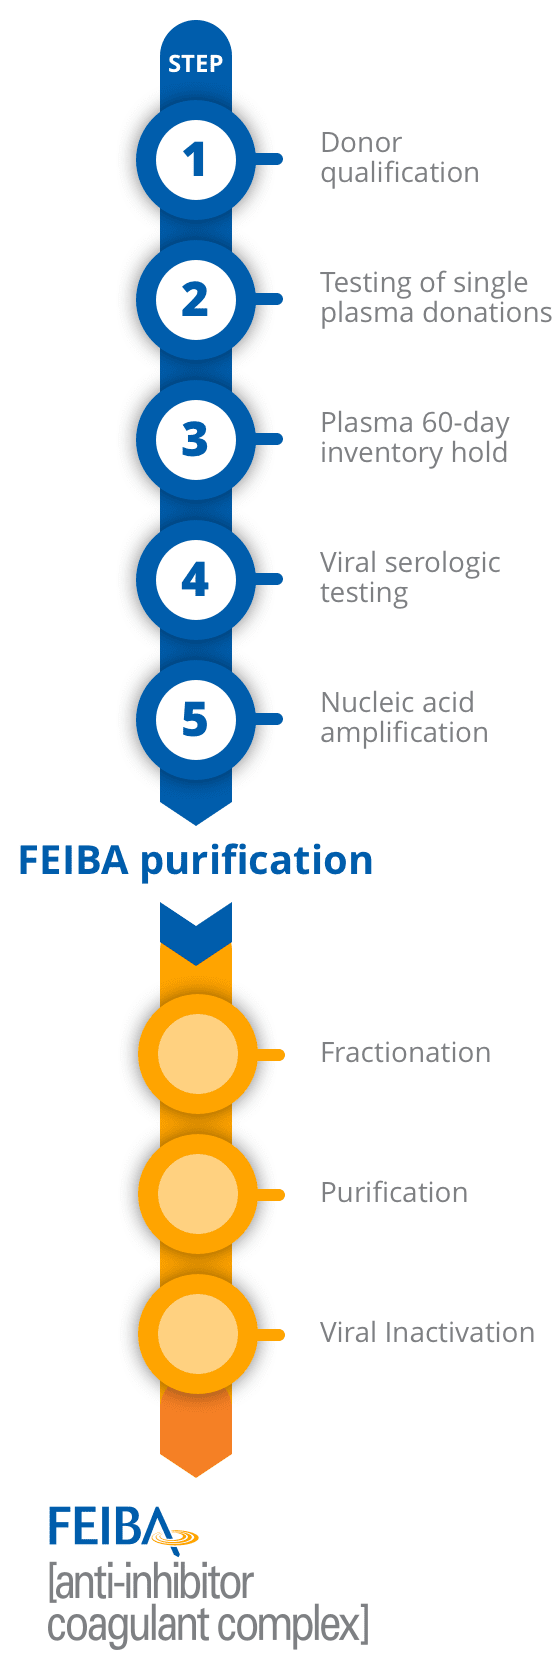 The FEIBA plasma screening and purification processes help to ensure purity and safety